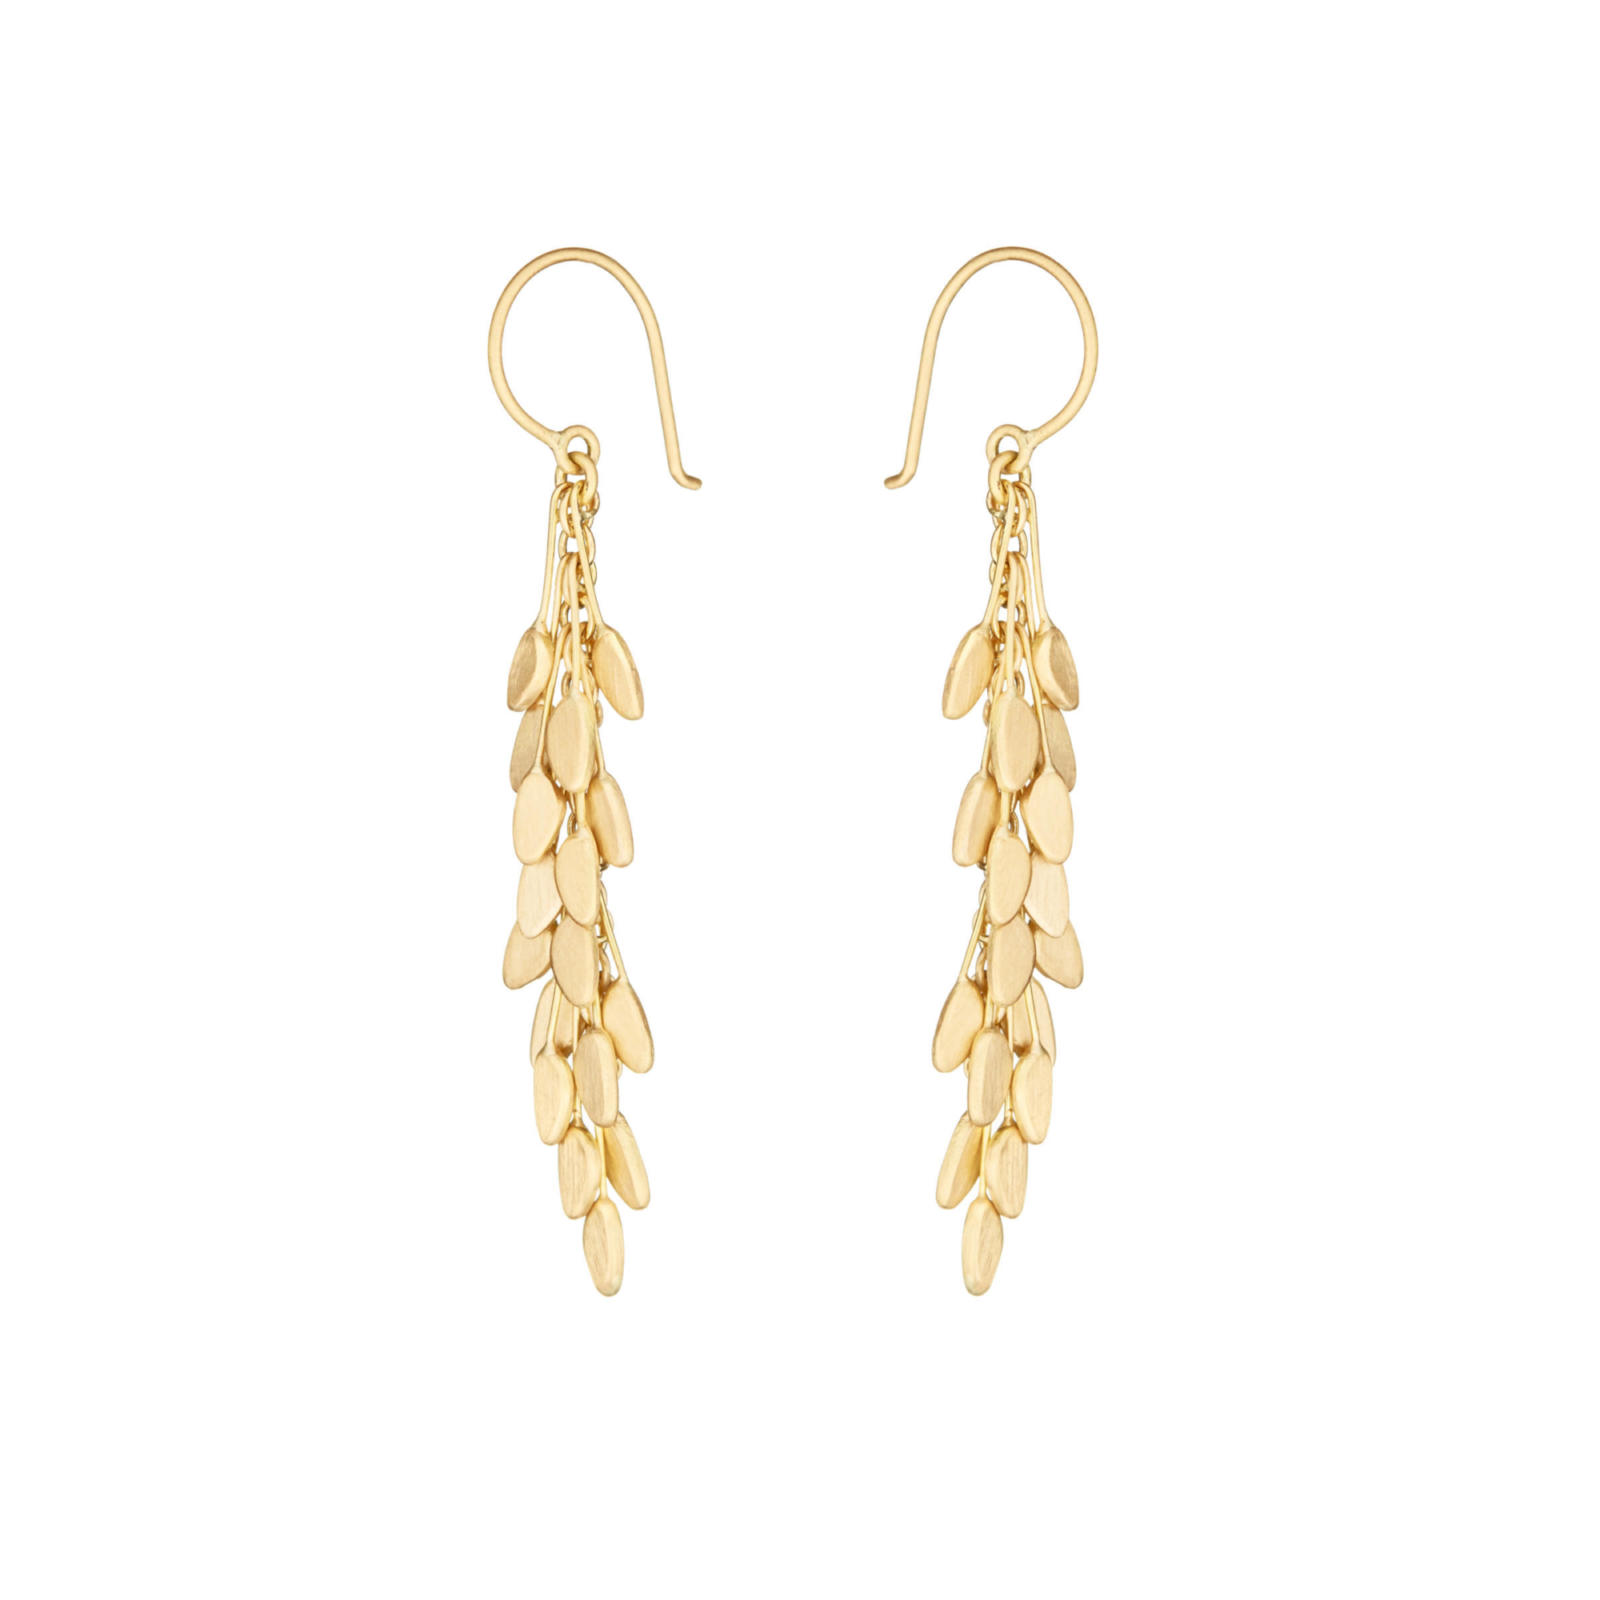 Sia Taylor ME9 Y Yellow Gold Earrings S